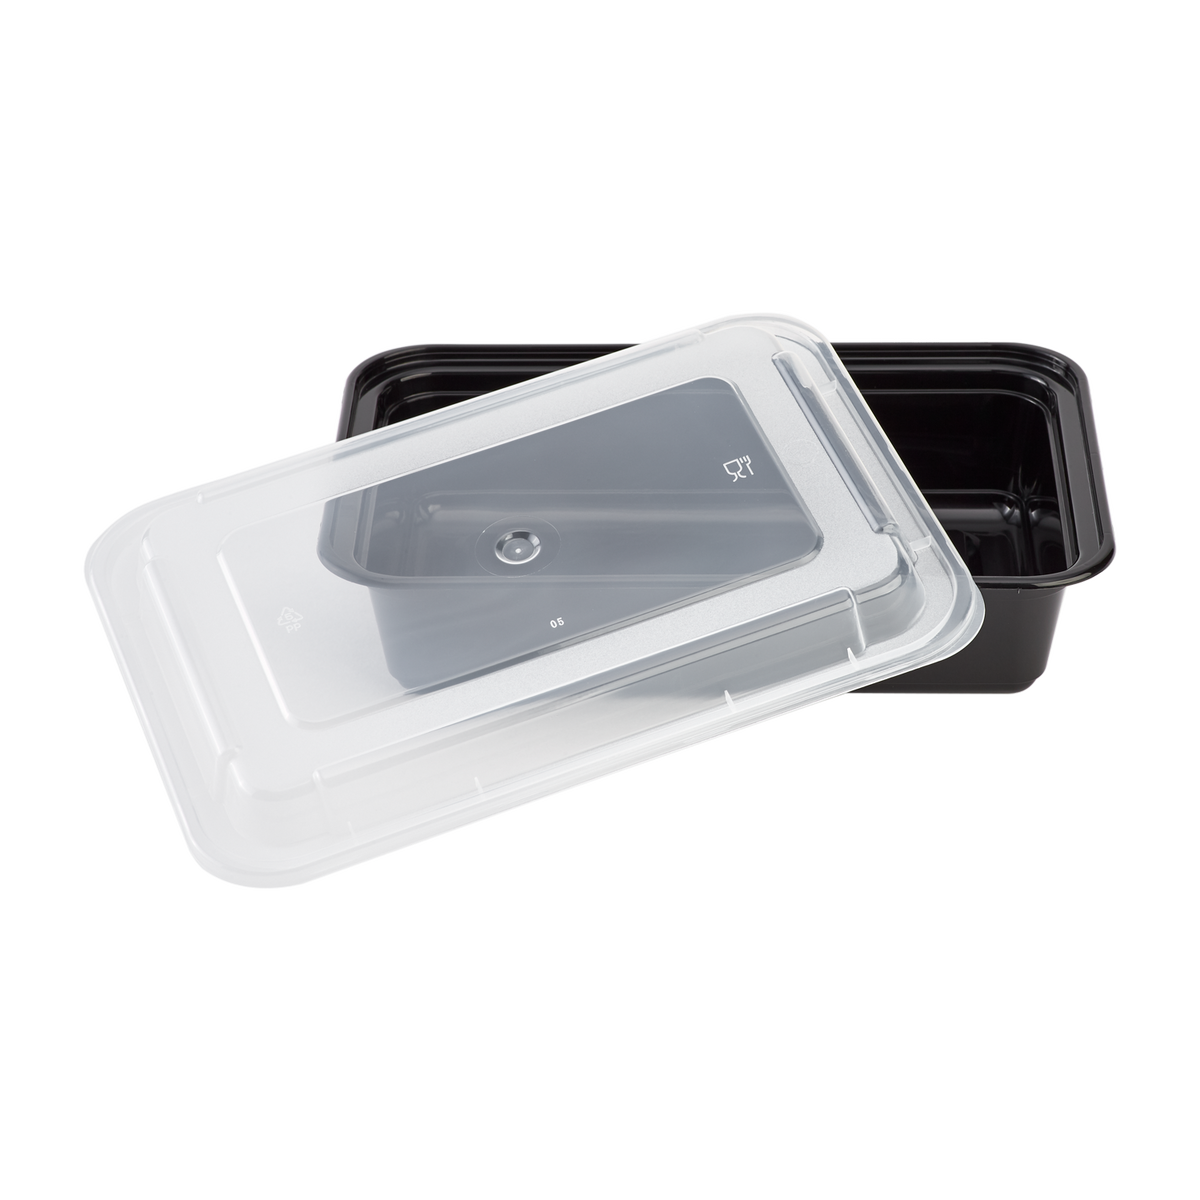 Glotoch Meal Prep Container, 38OZ 1 Compartment to Go Containers